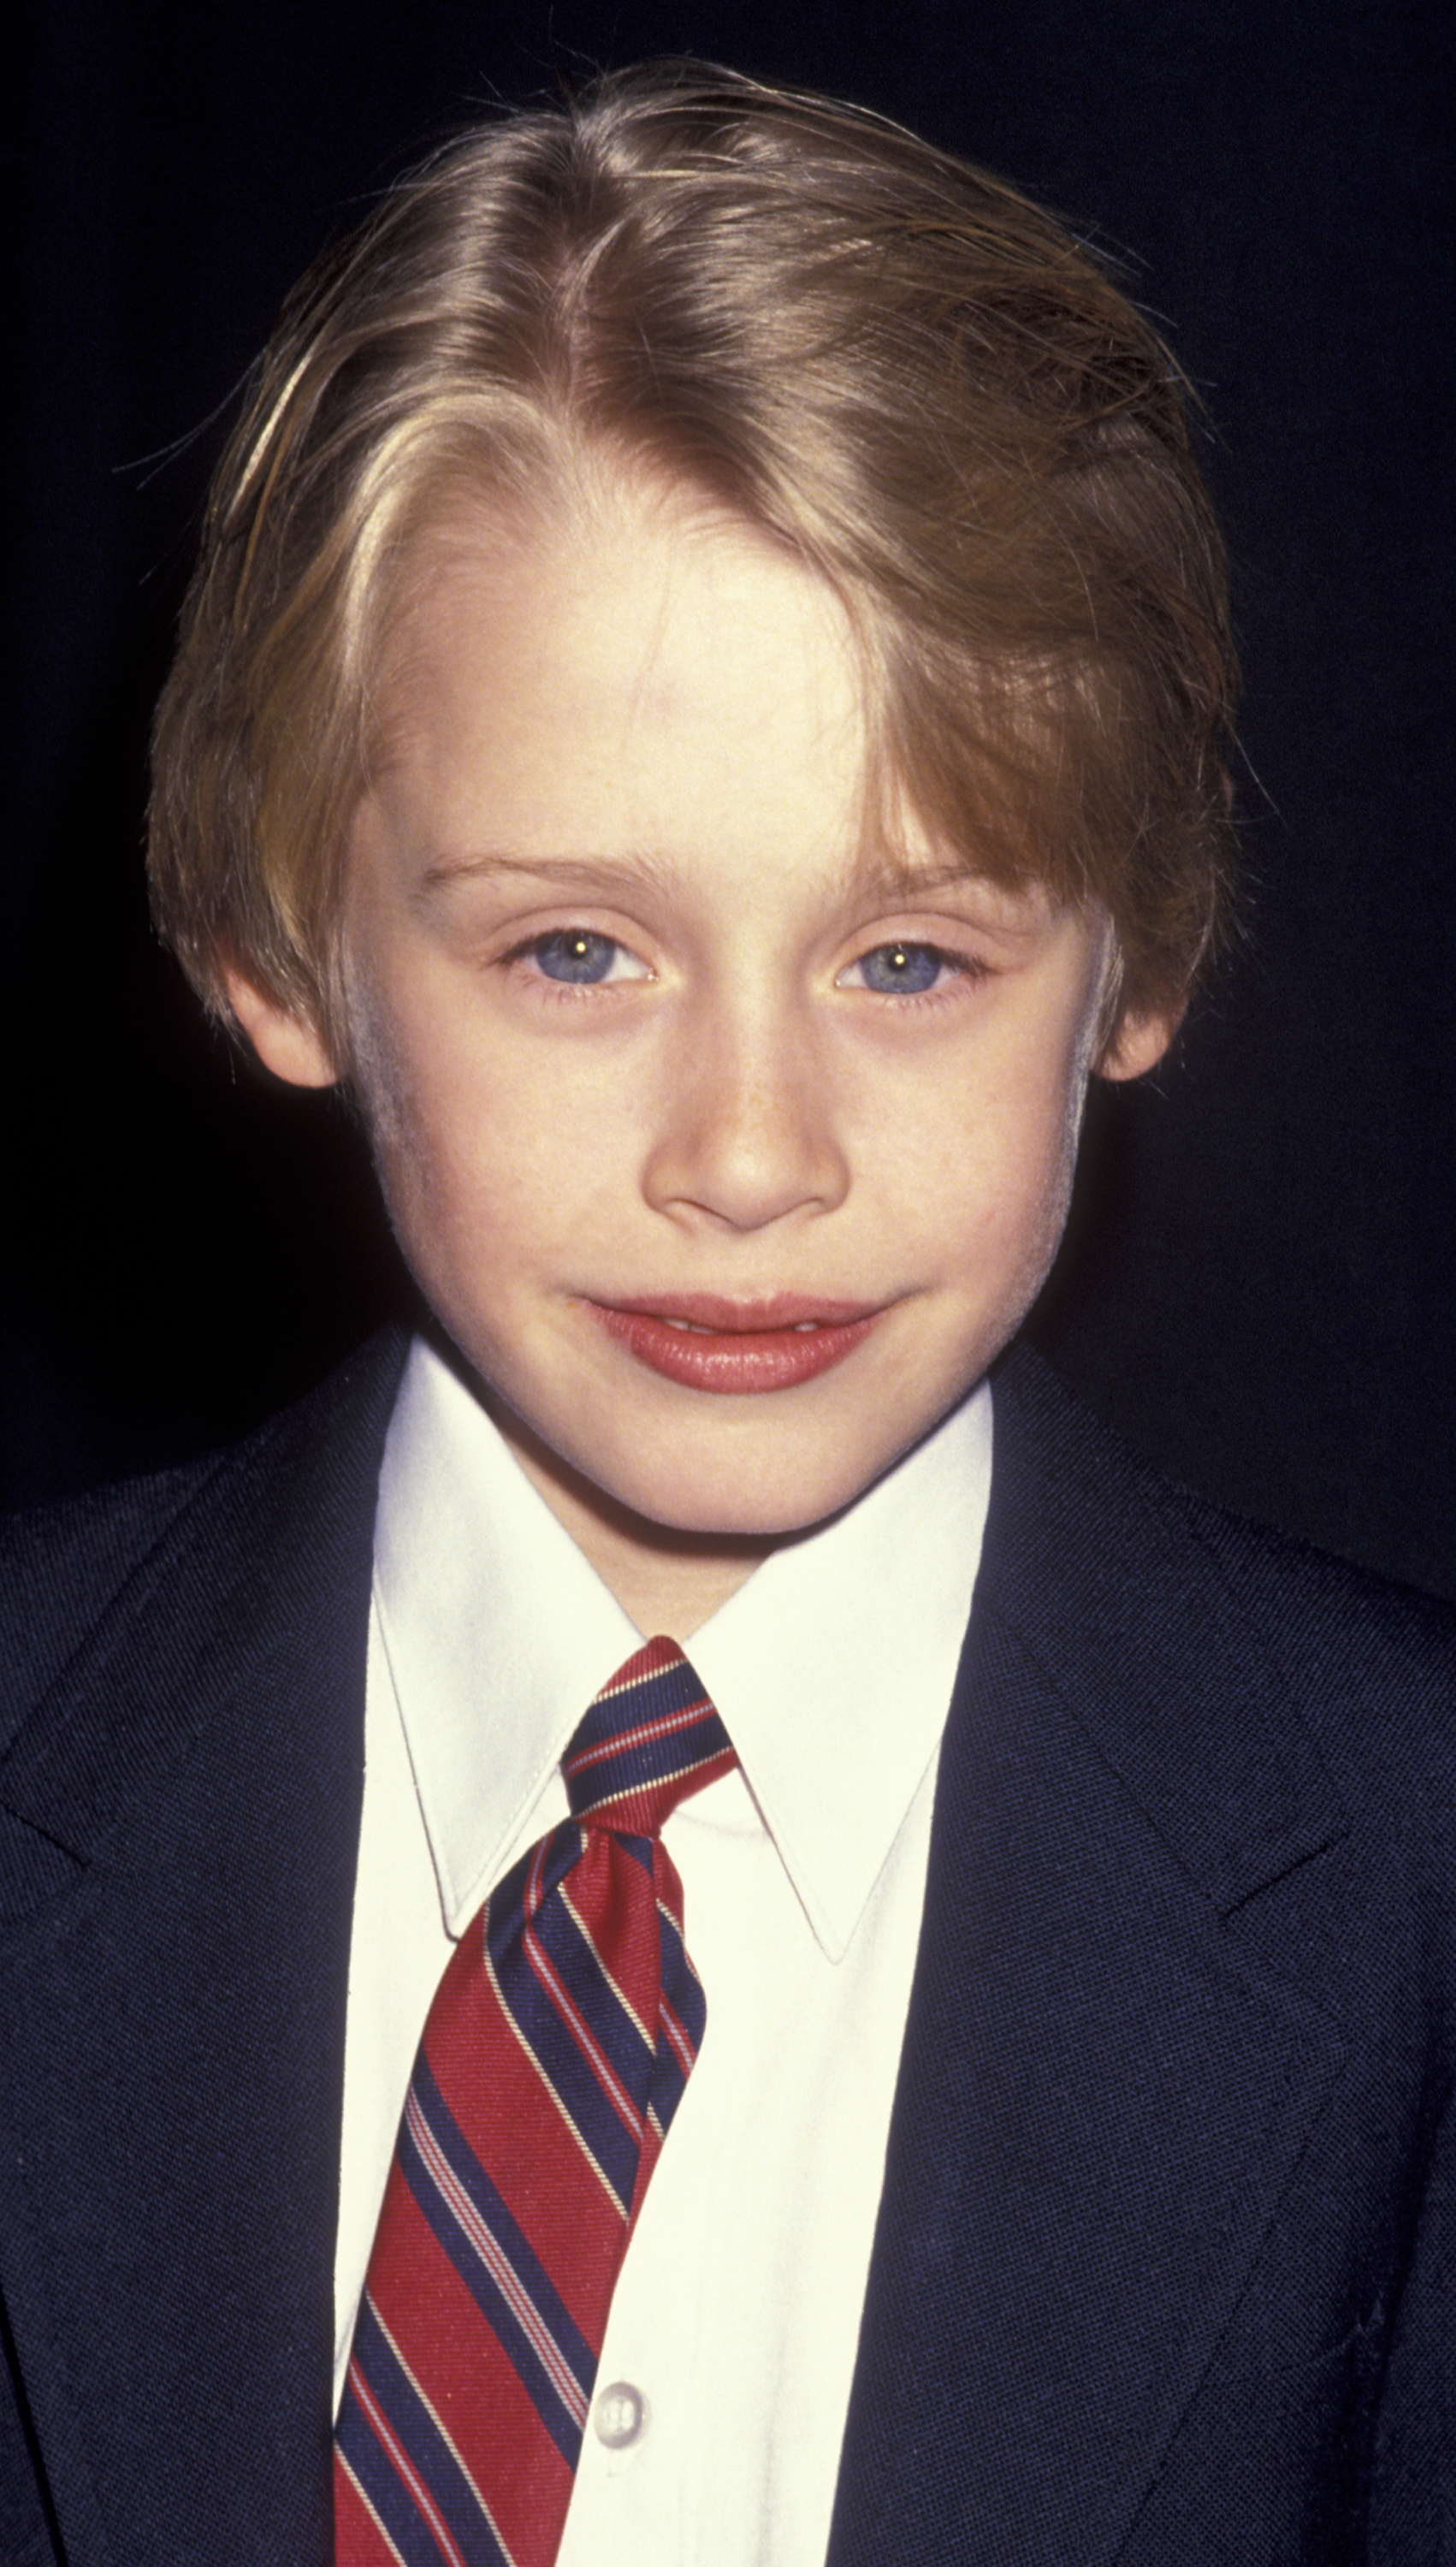 Macaulay Culkin on March 4, 1991 at the Equitable Center in New York City | Source: Getty Images